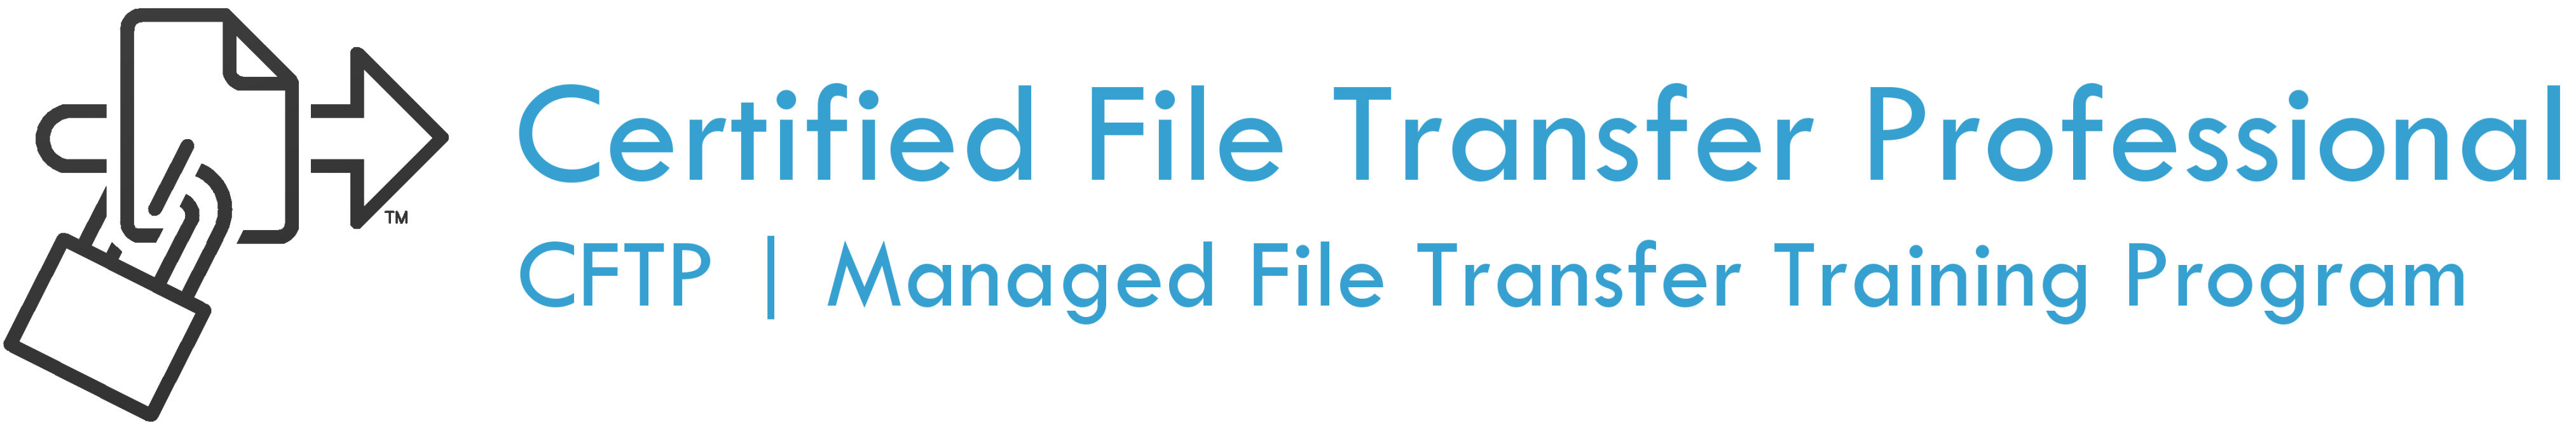 Certified File Transfer Professional Training Programme